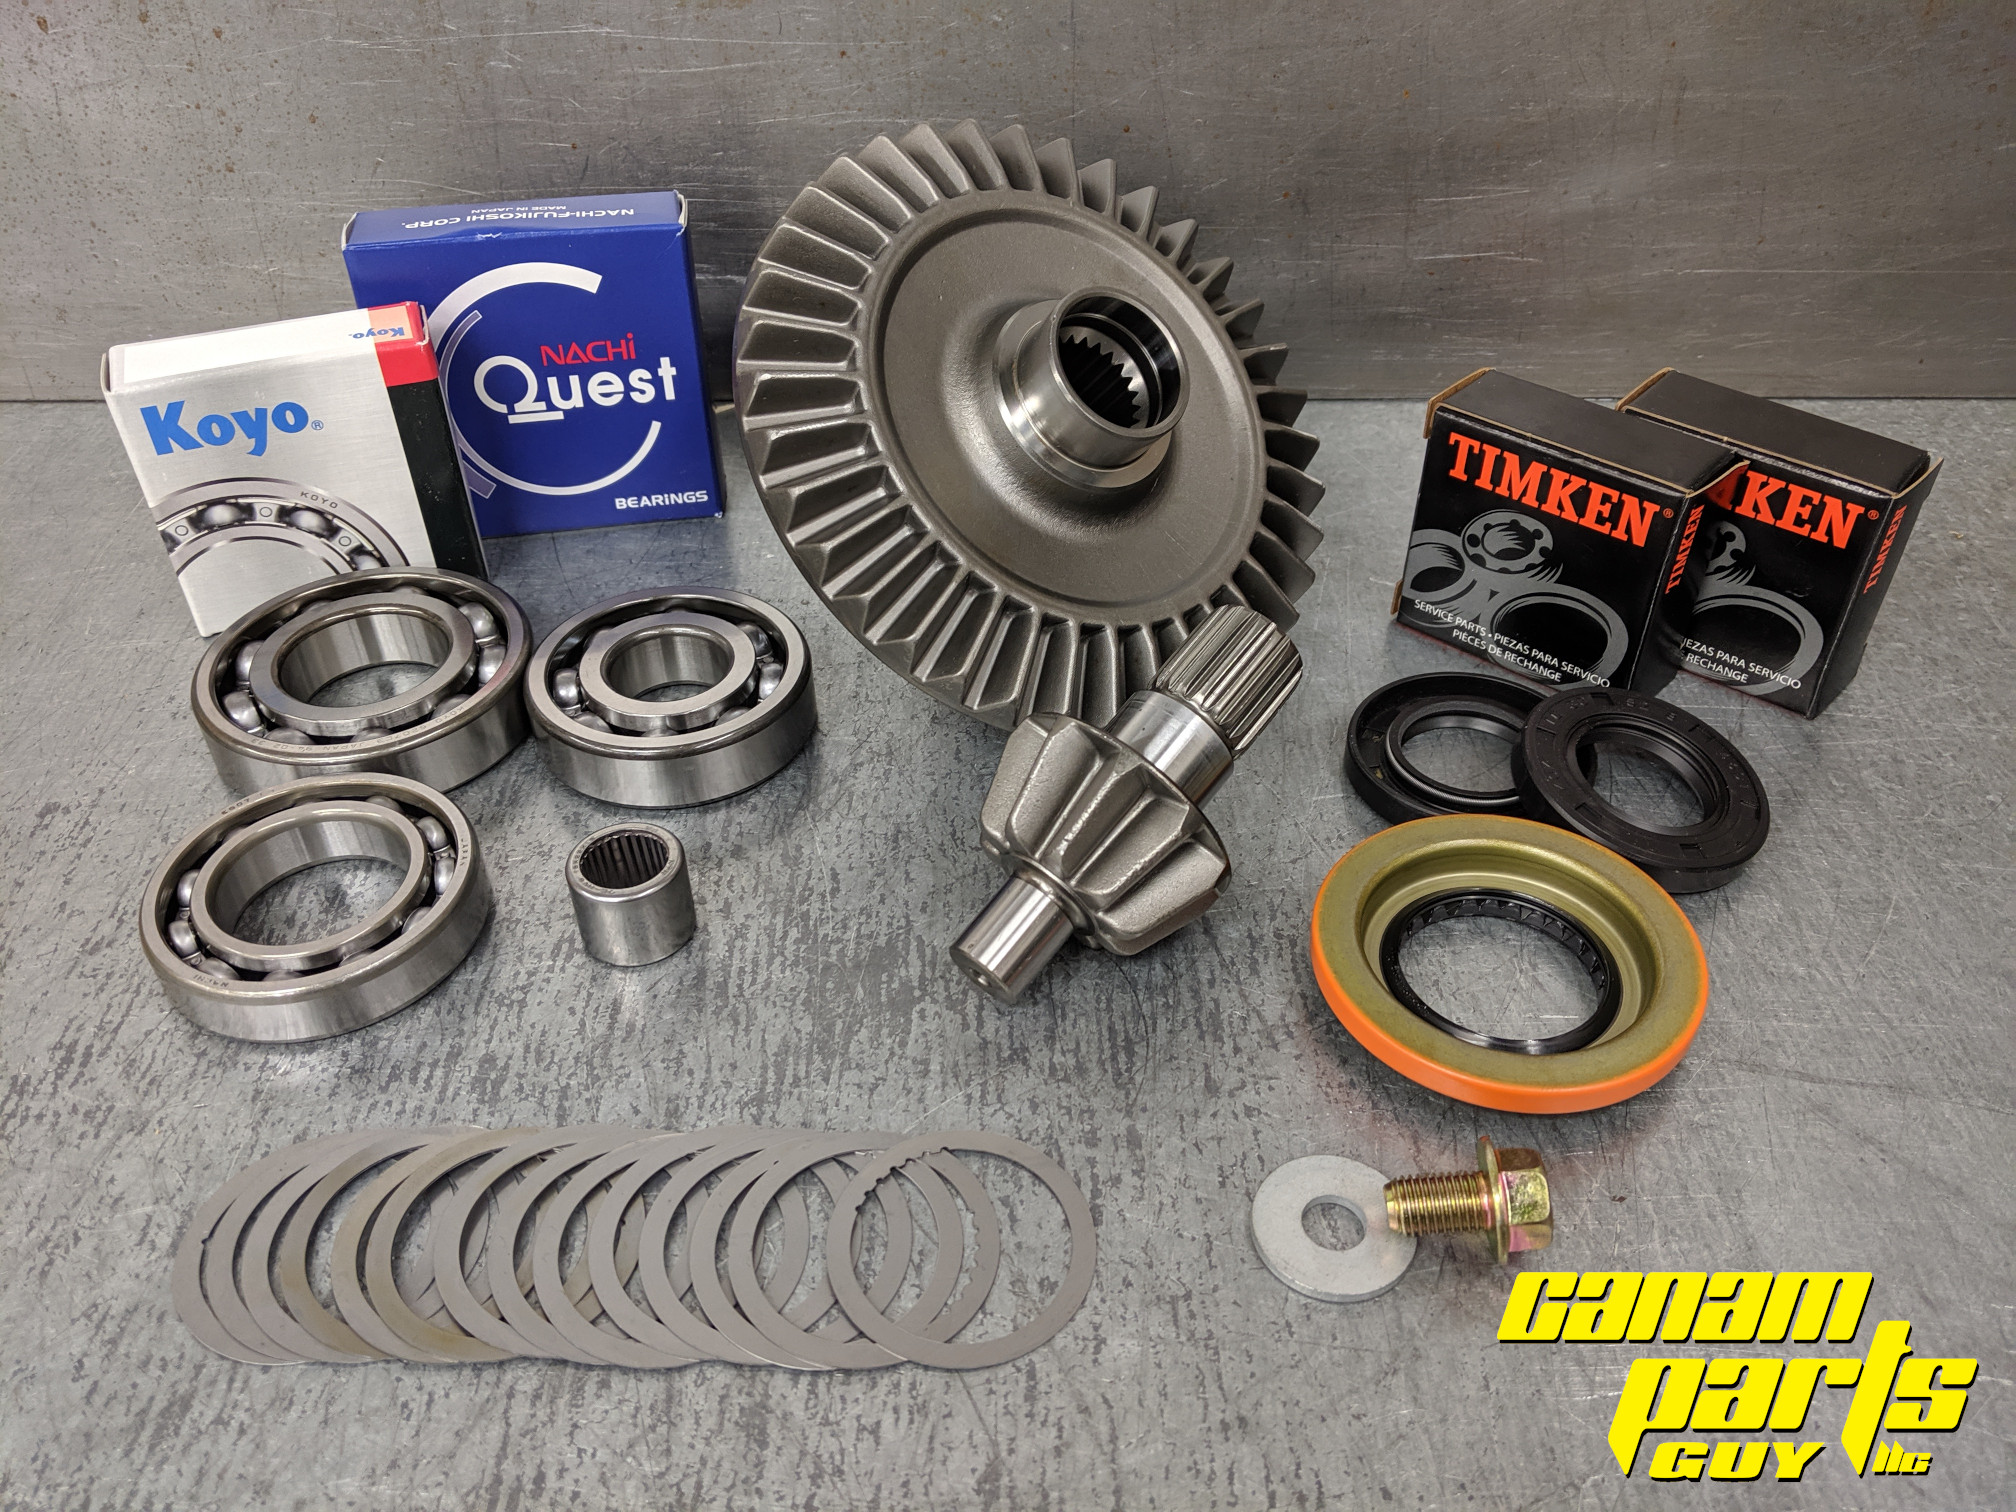 New Oem Standard G2 Rear Differential Rebuild Kit 1652 Can Am